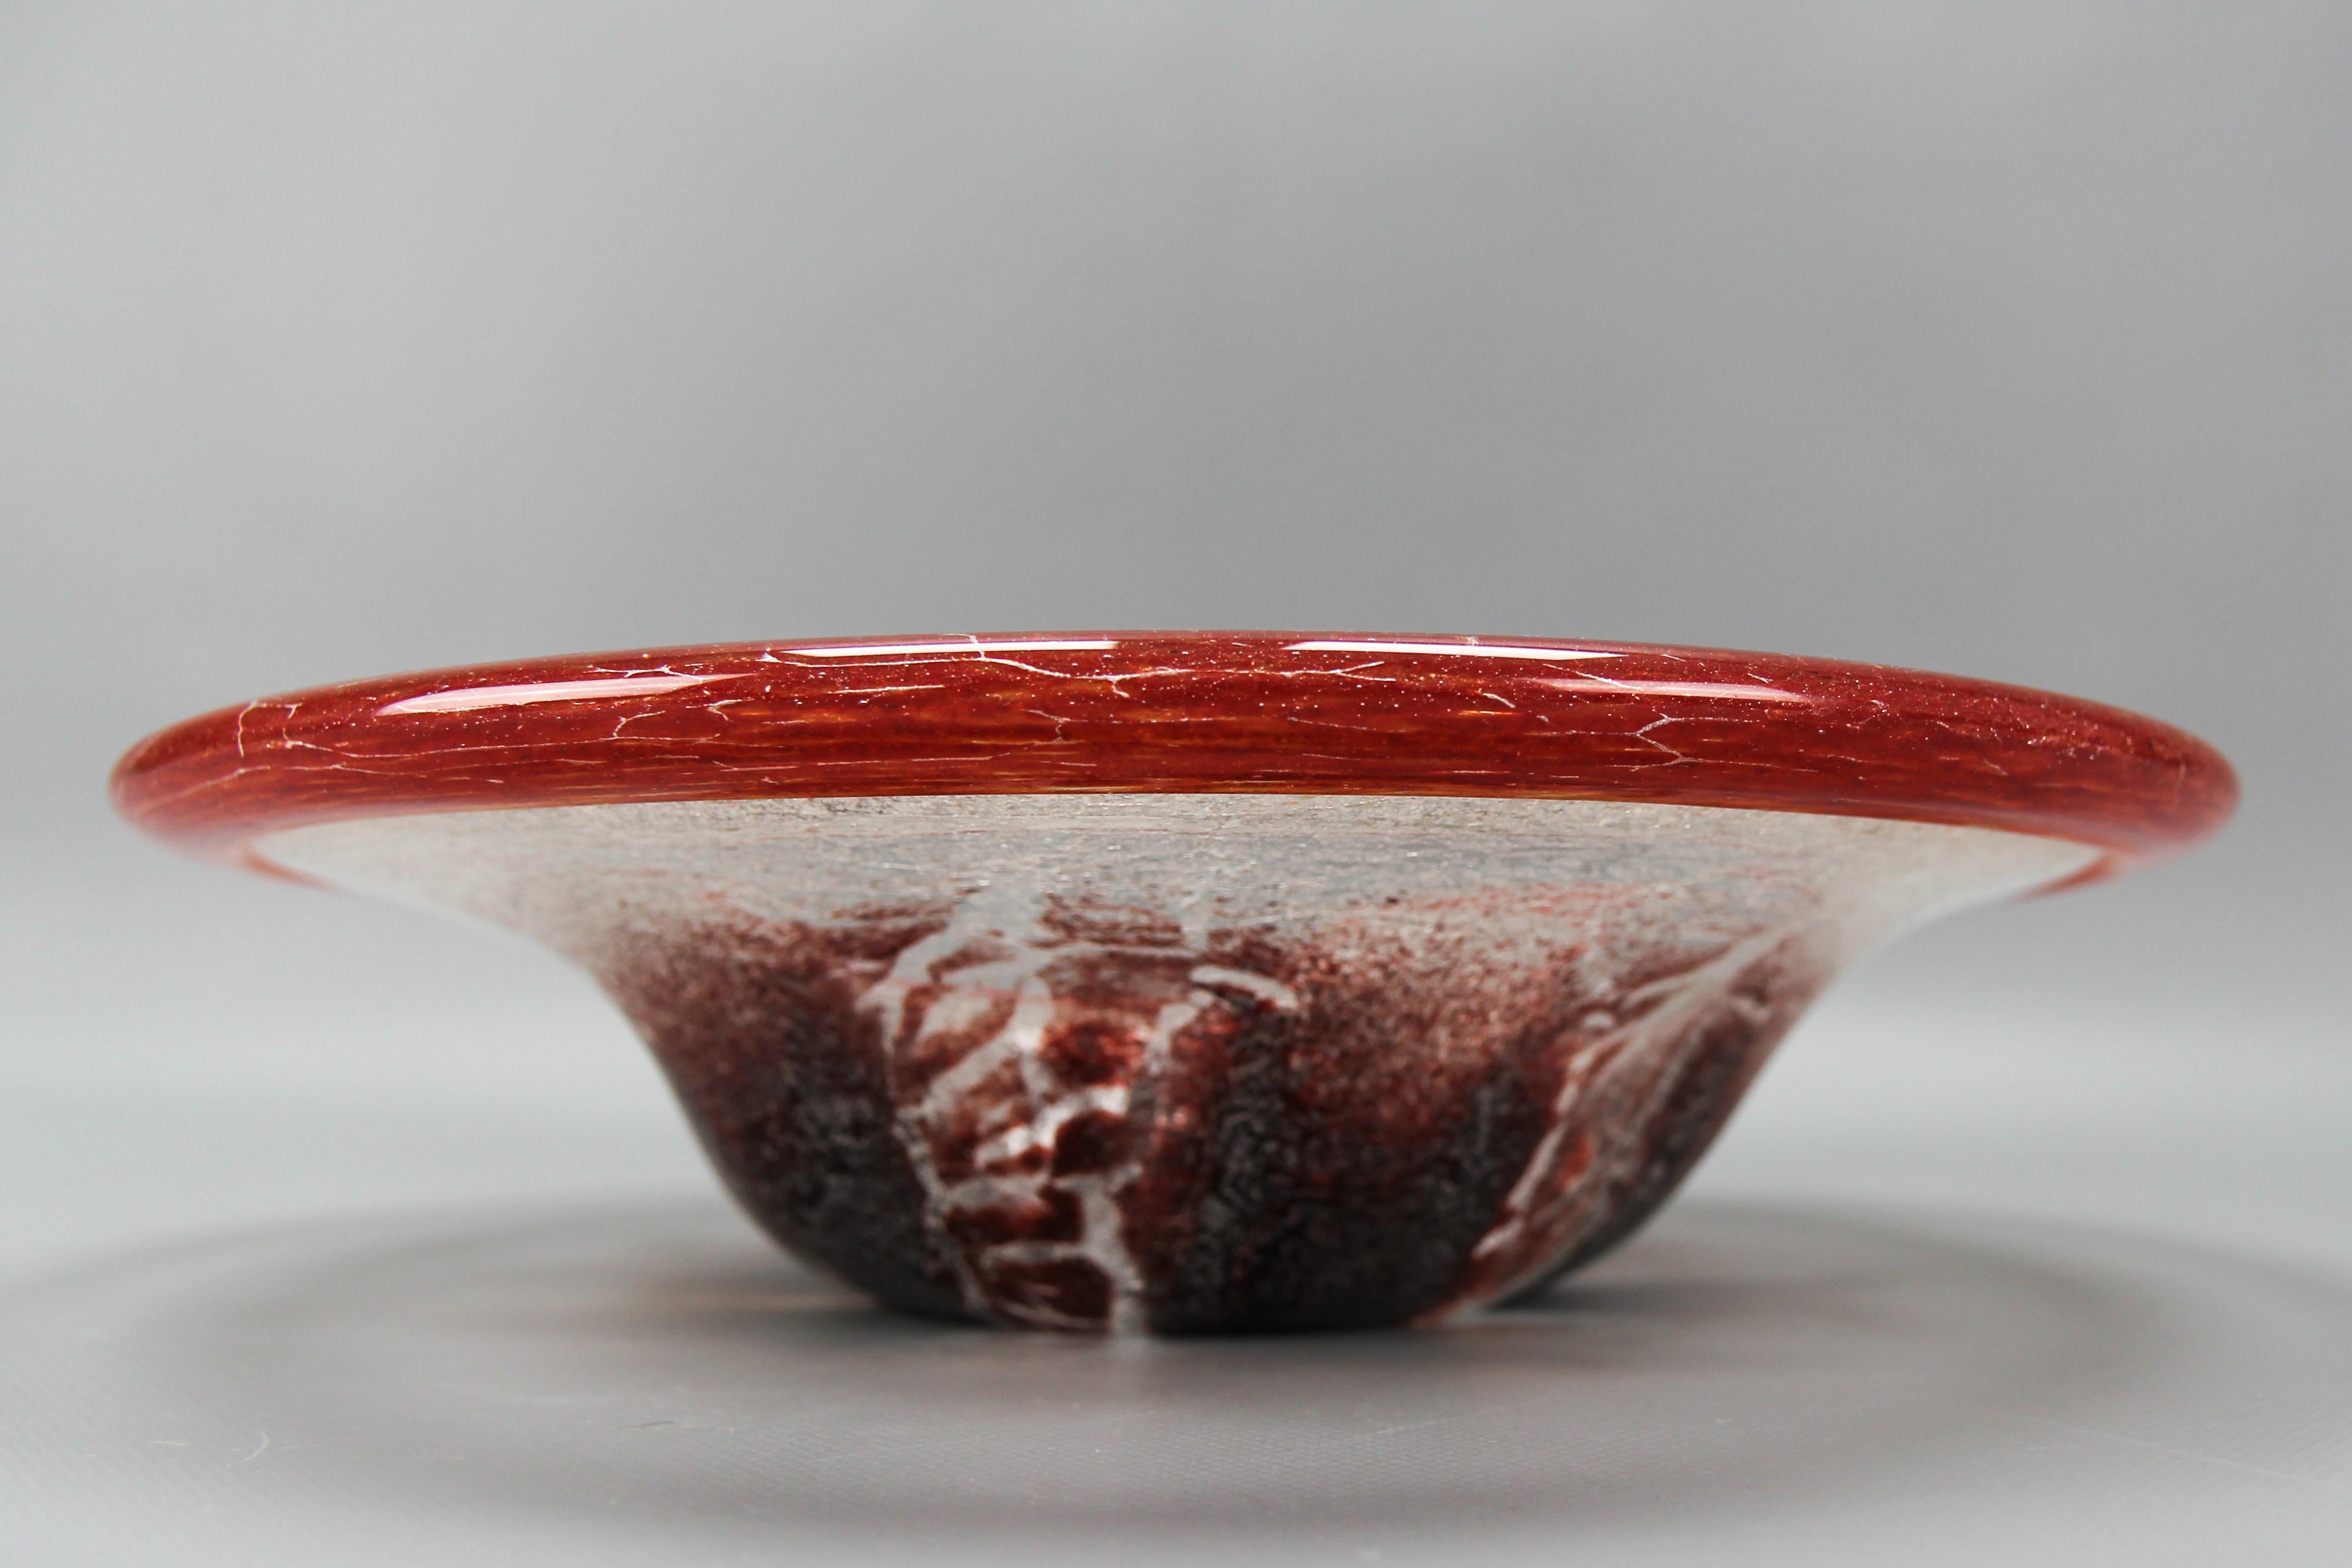 German Ikora Art Glass Bowl in Red, White and Burgundy by WMF, ca. 1930s For Sale 6